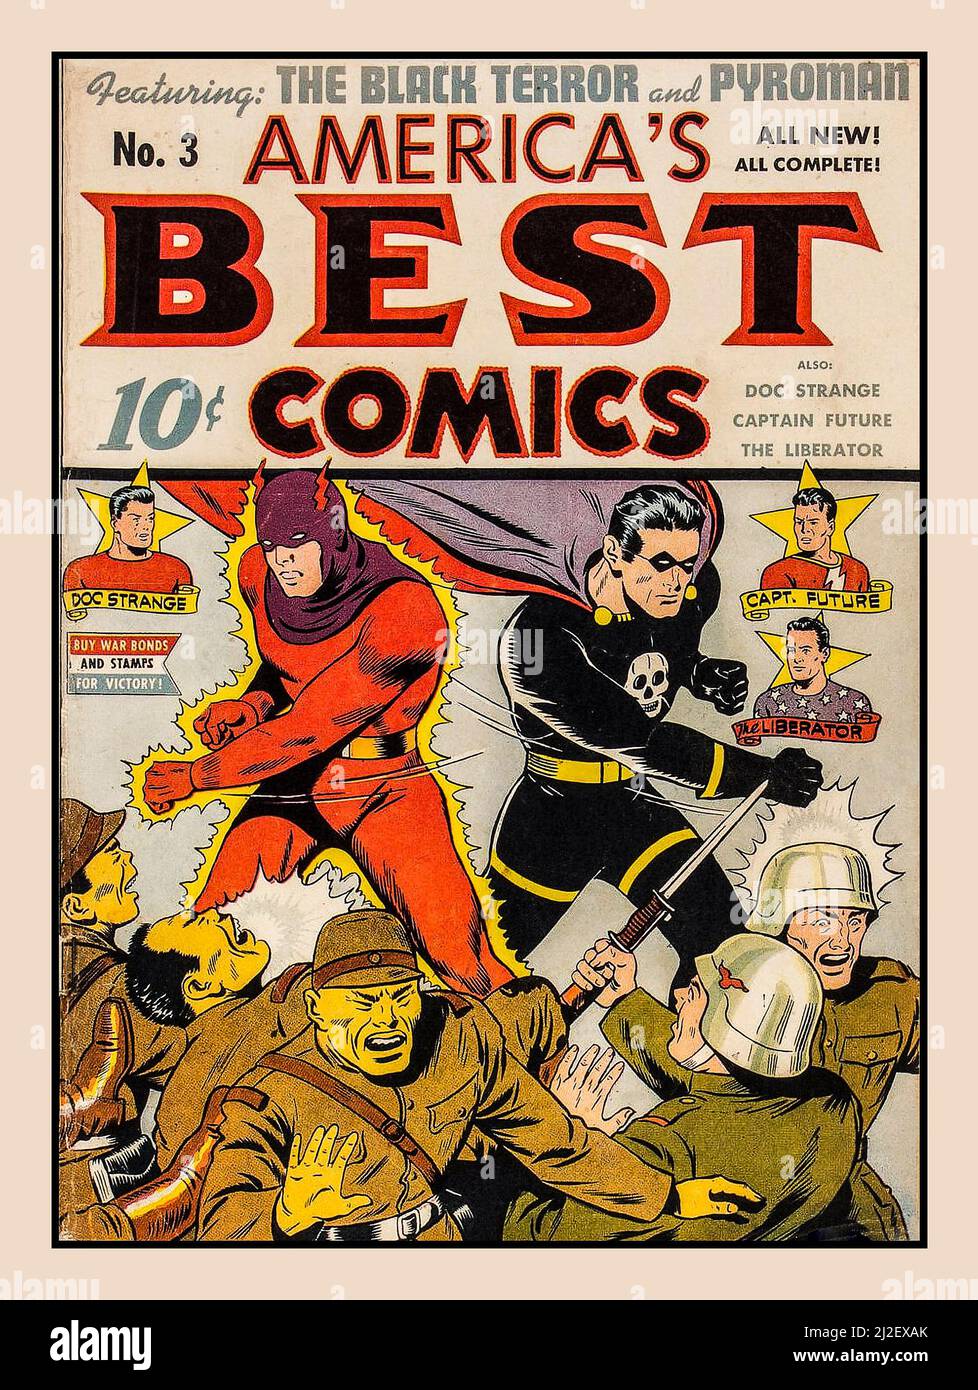 WW2 American Comic Propaganda with 'Americas Best Comics' super heroes fighting Japanese and German Axis forces Capt. Future, The Liberator, and Doc Strange. An appeal for War Bonds and Stamps for Victory ! World War II 1942 Stock Photo